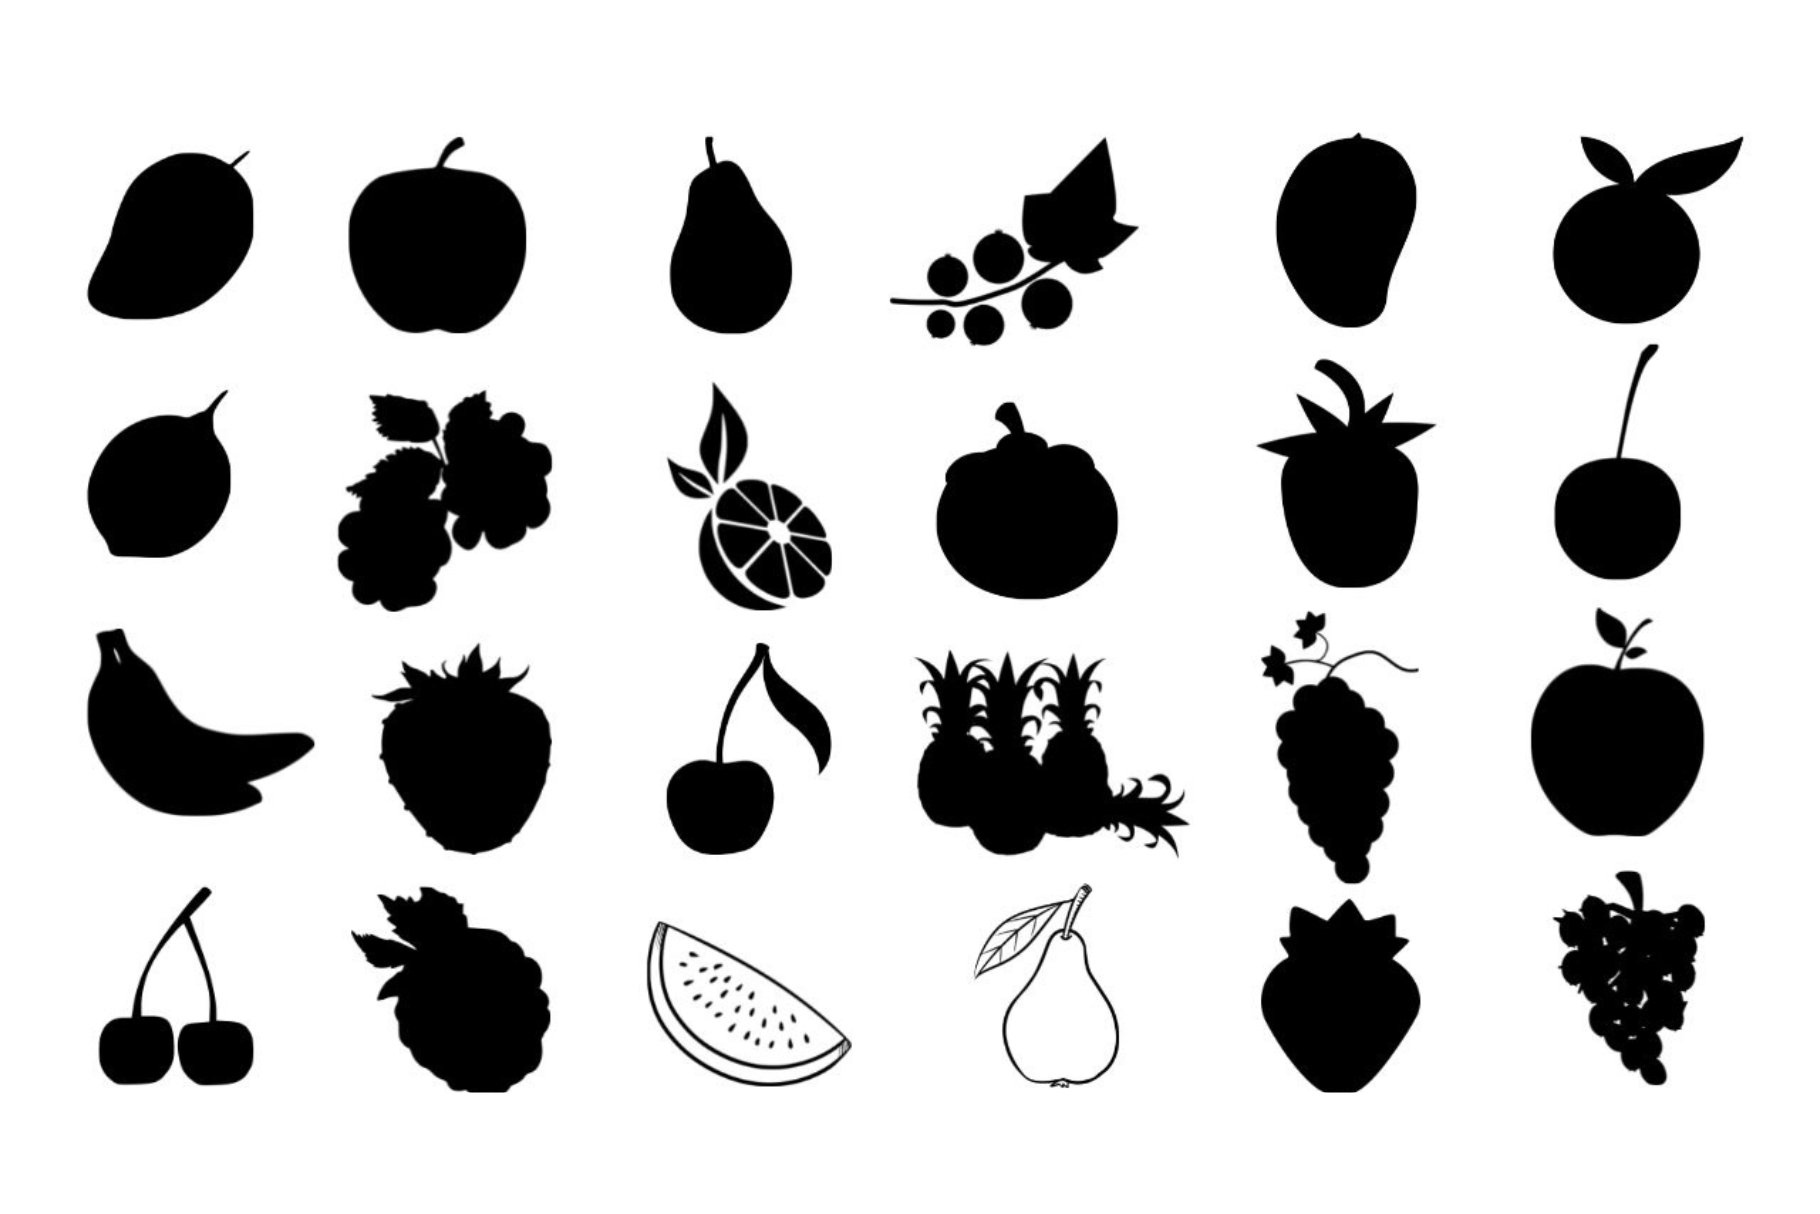 Fruits SVG cover image.